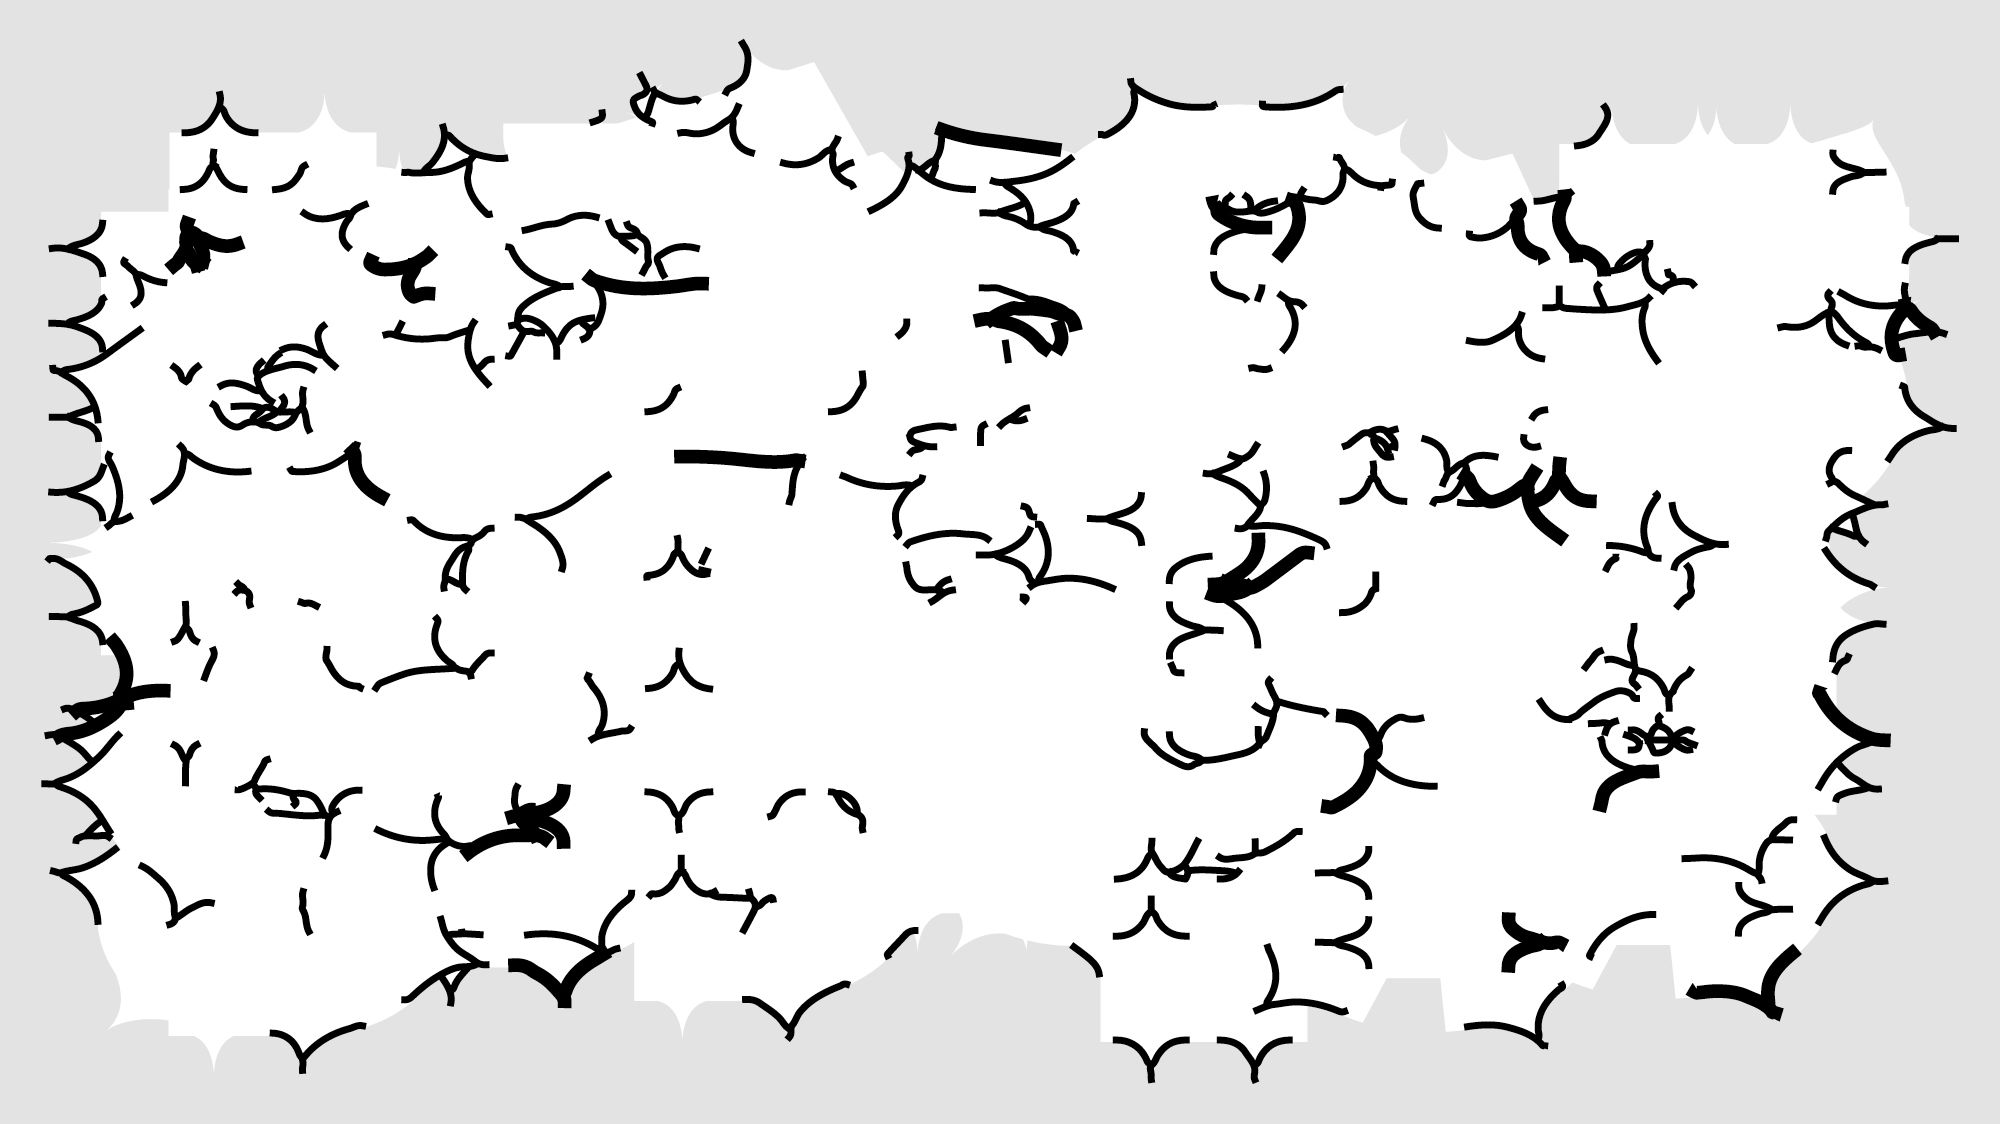 A white jumble of shapes, some of which resemble letters, outlined in black dashes.